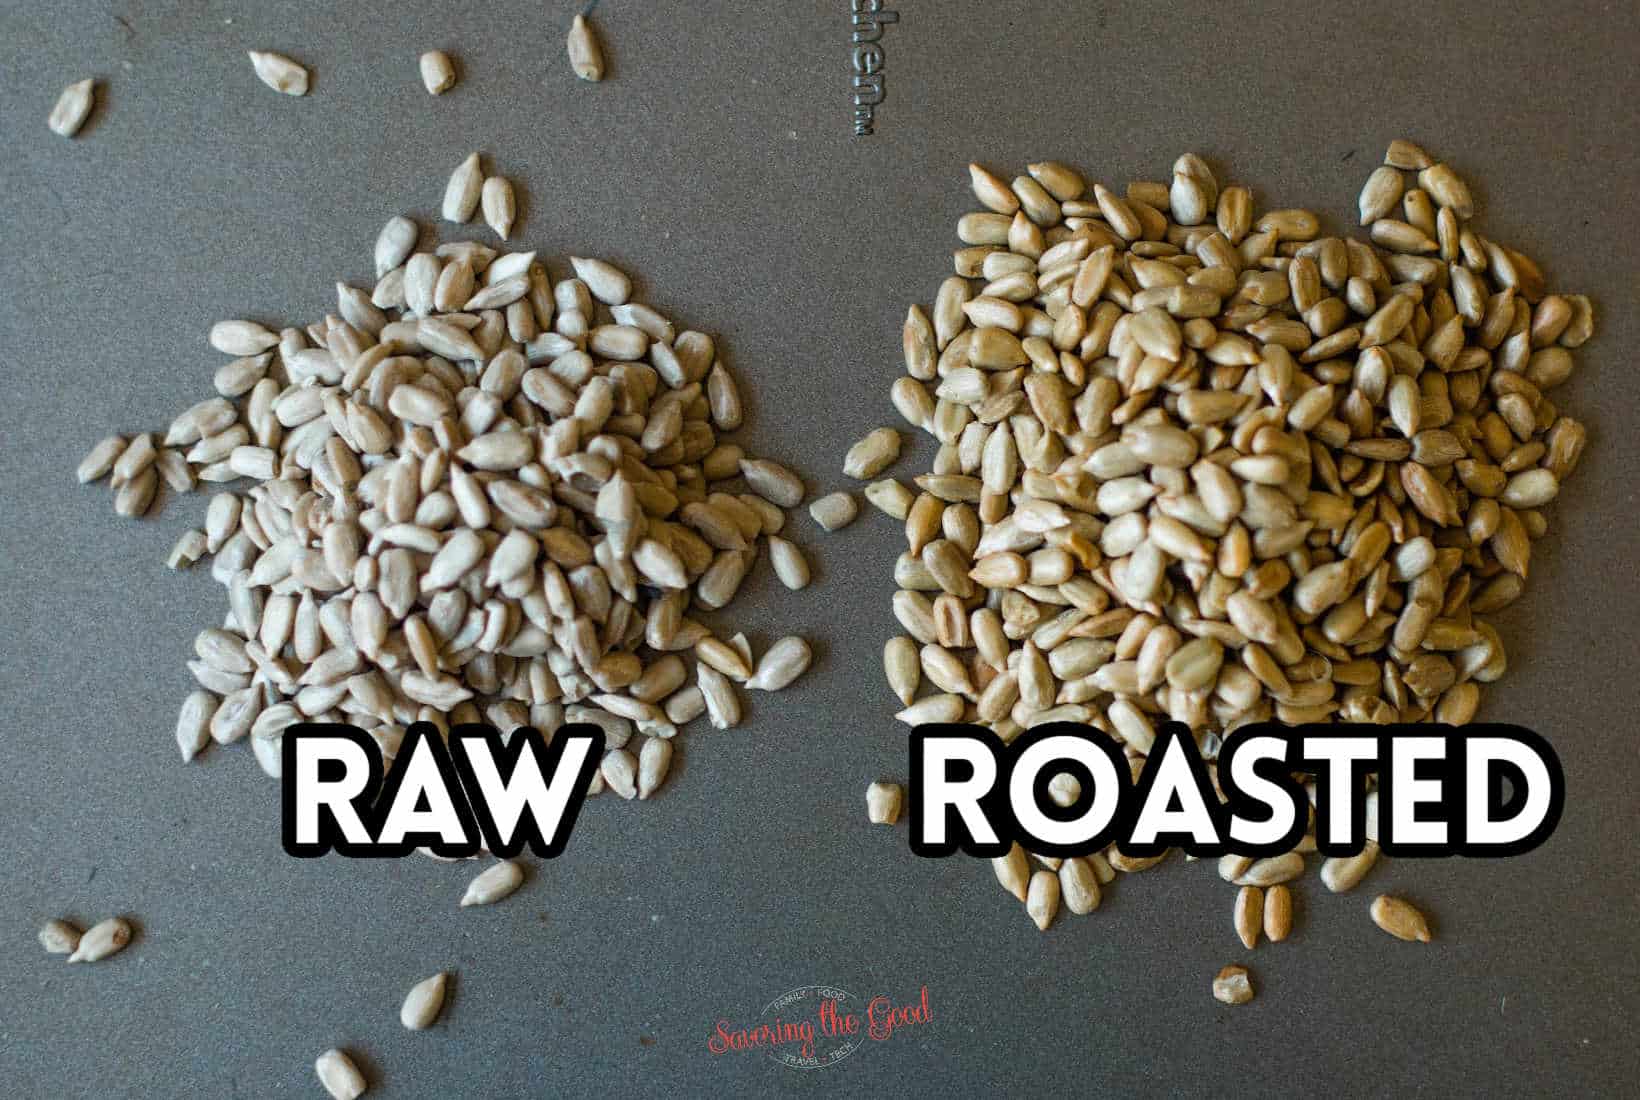 example of raw sunflower seeds vs roasted sunflower seeds with text overlay